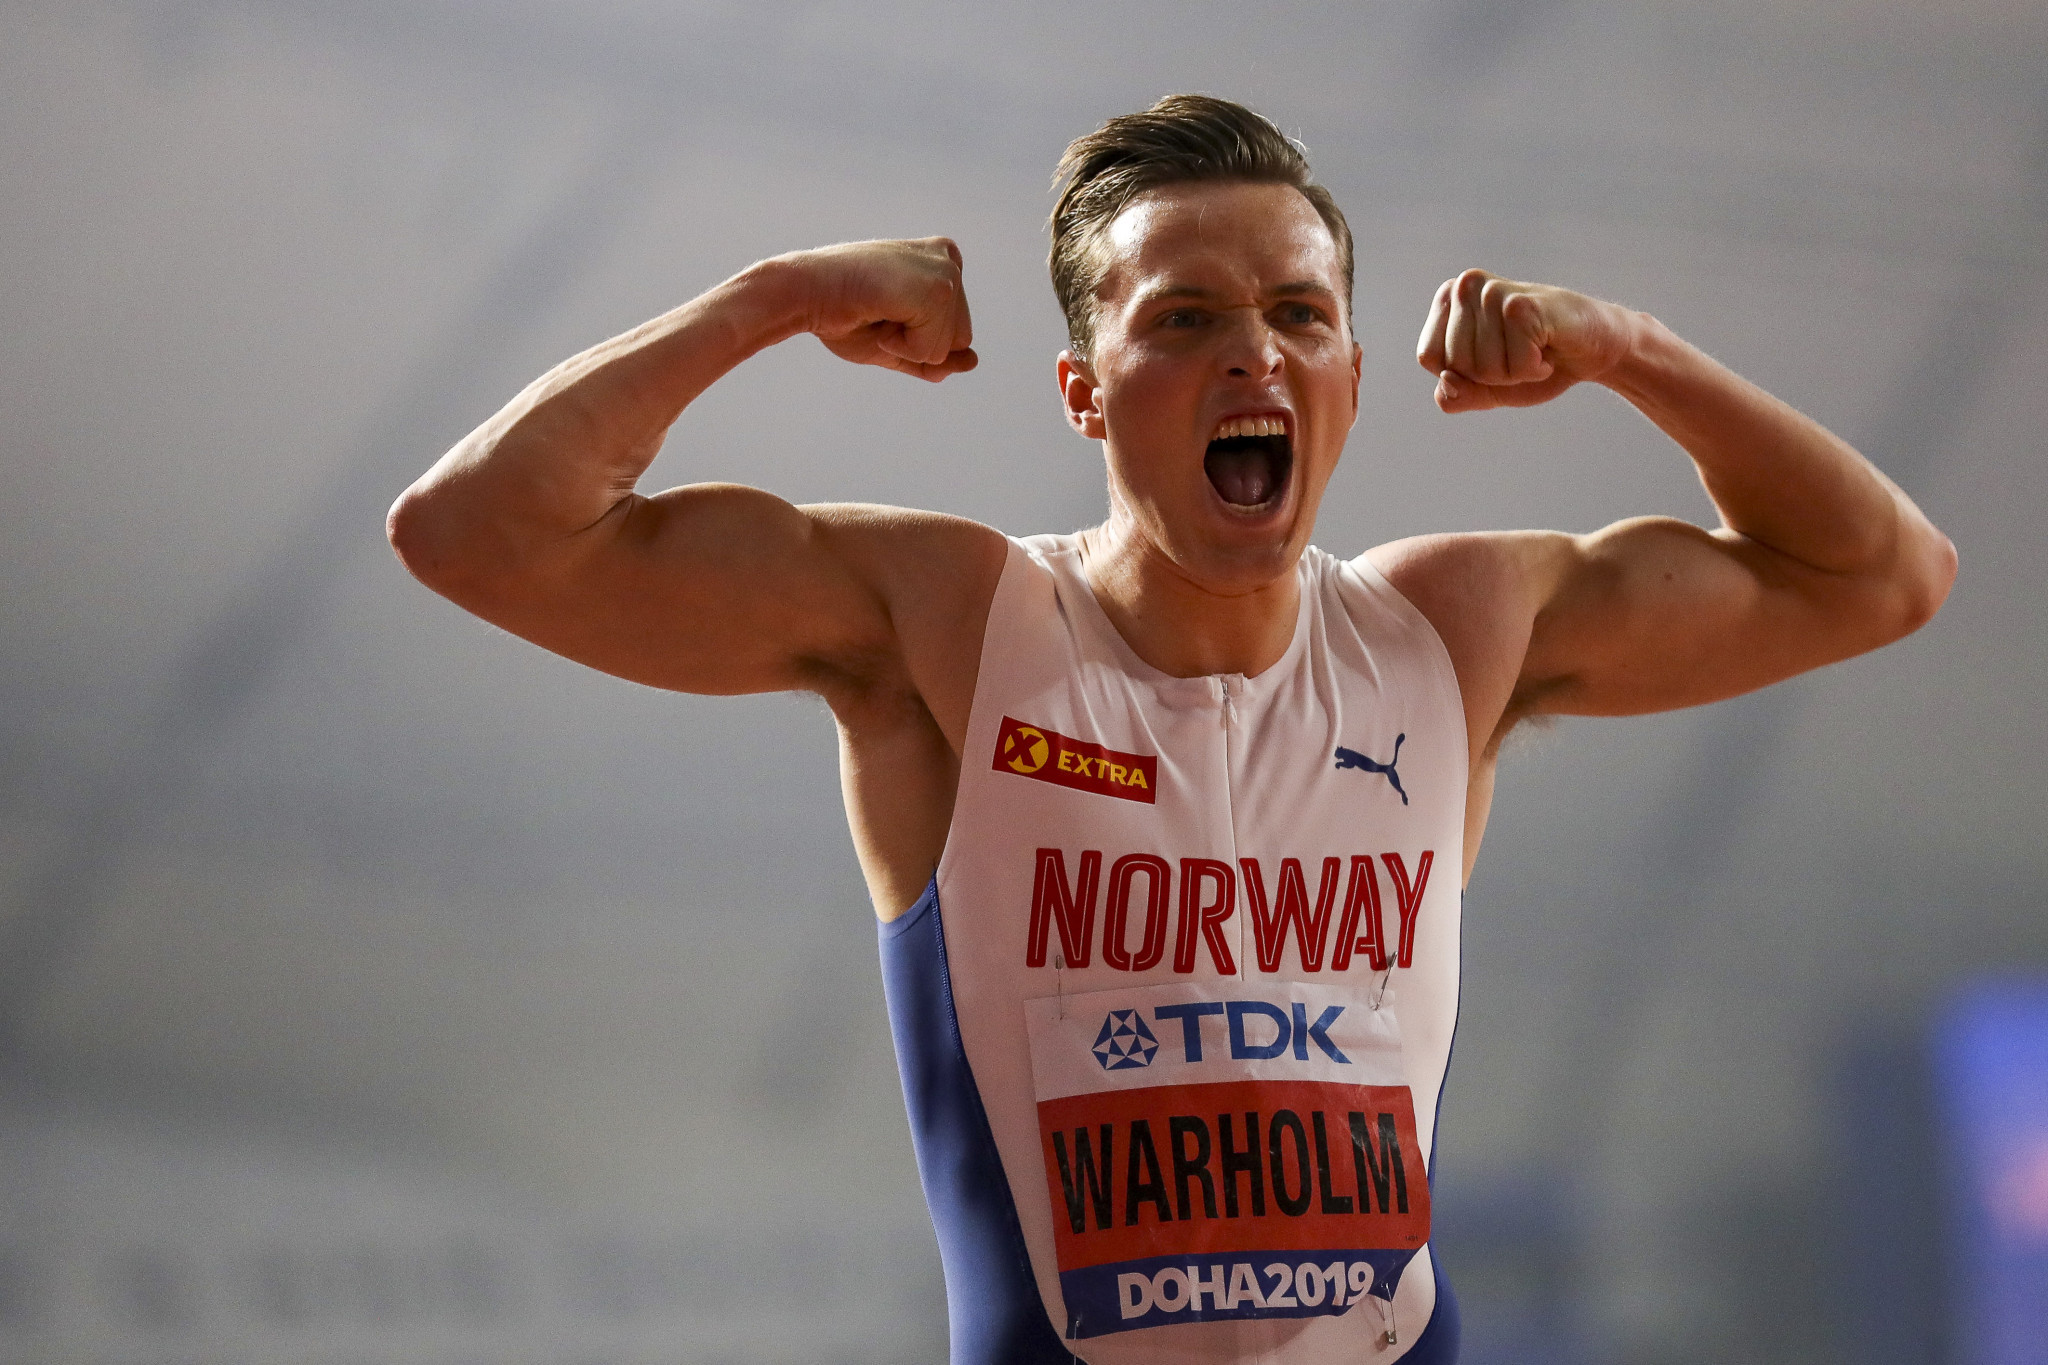 Norway's Karsten Warholm did his "Superman" impression as he raced to an impressive victory in the 400 metres hurdles at the IAAF World Championships in Doha ©Getty Images